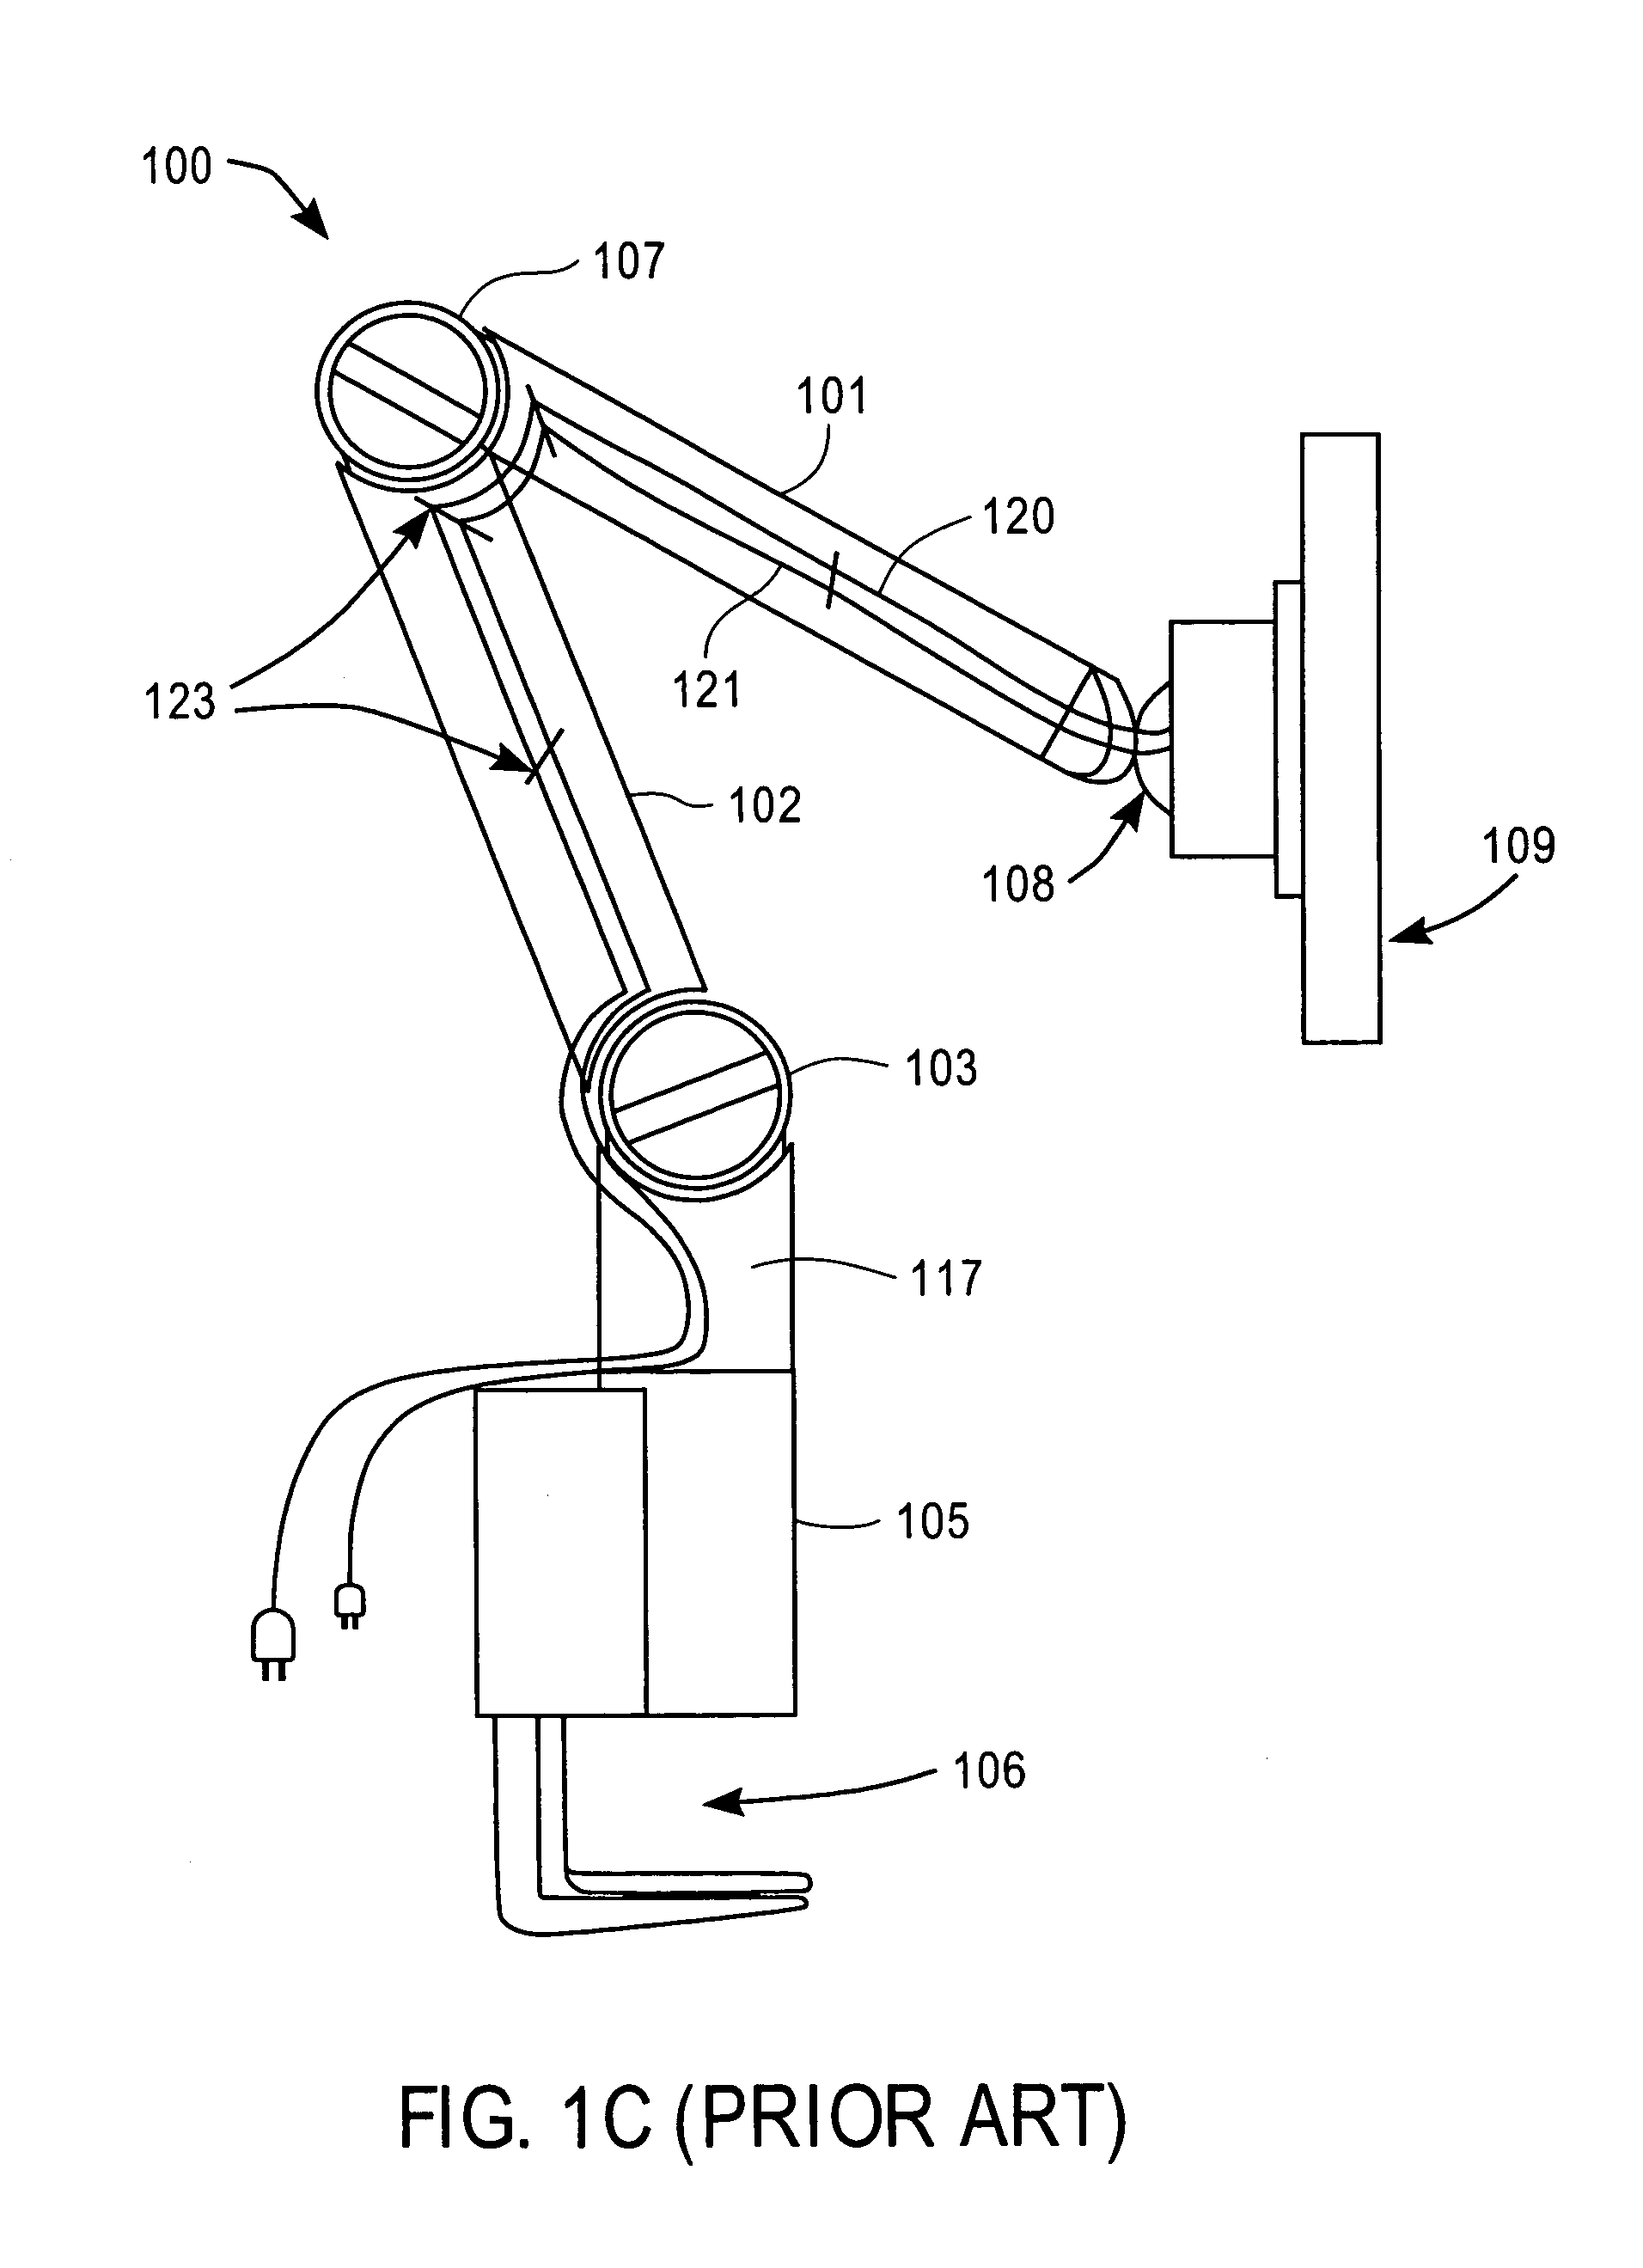 Computer controlled display device